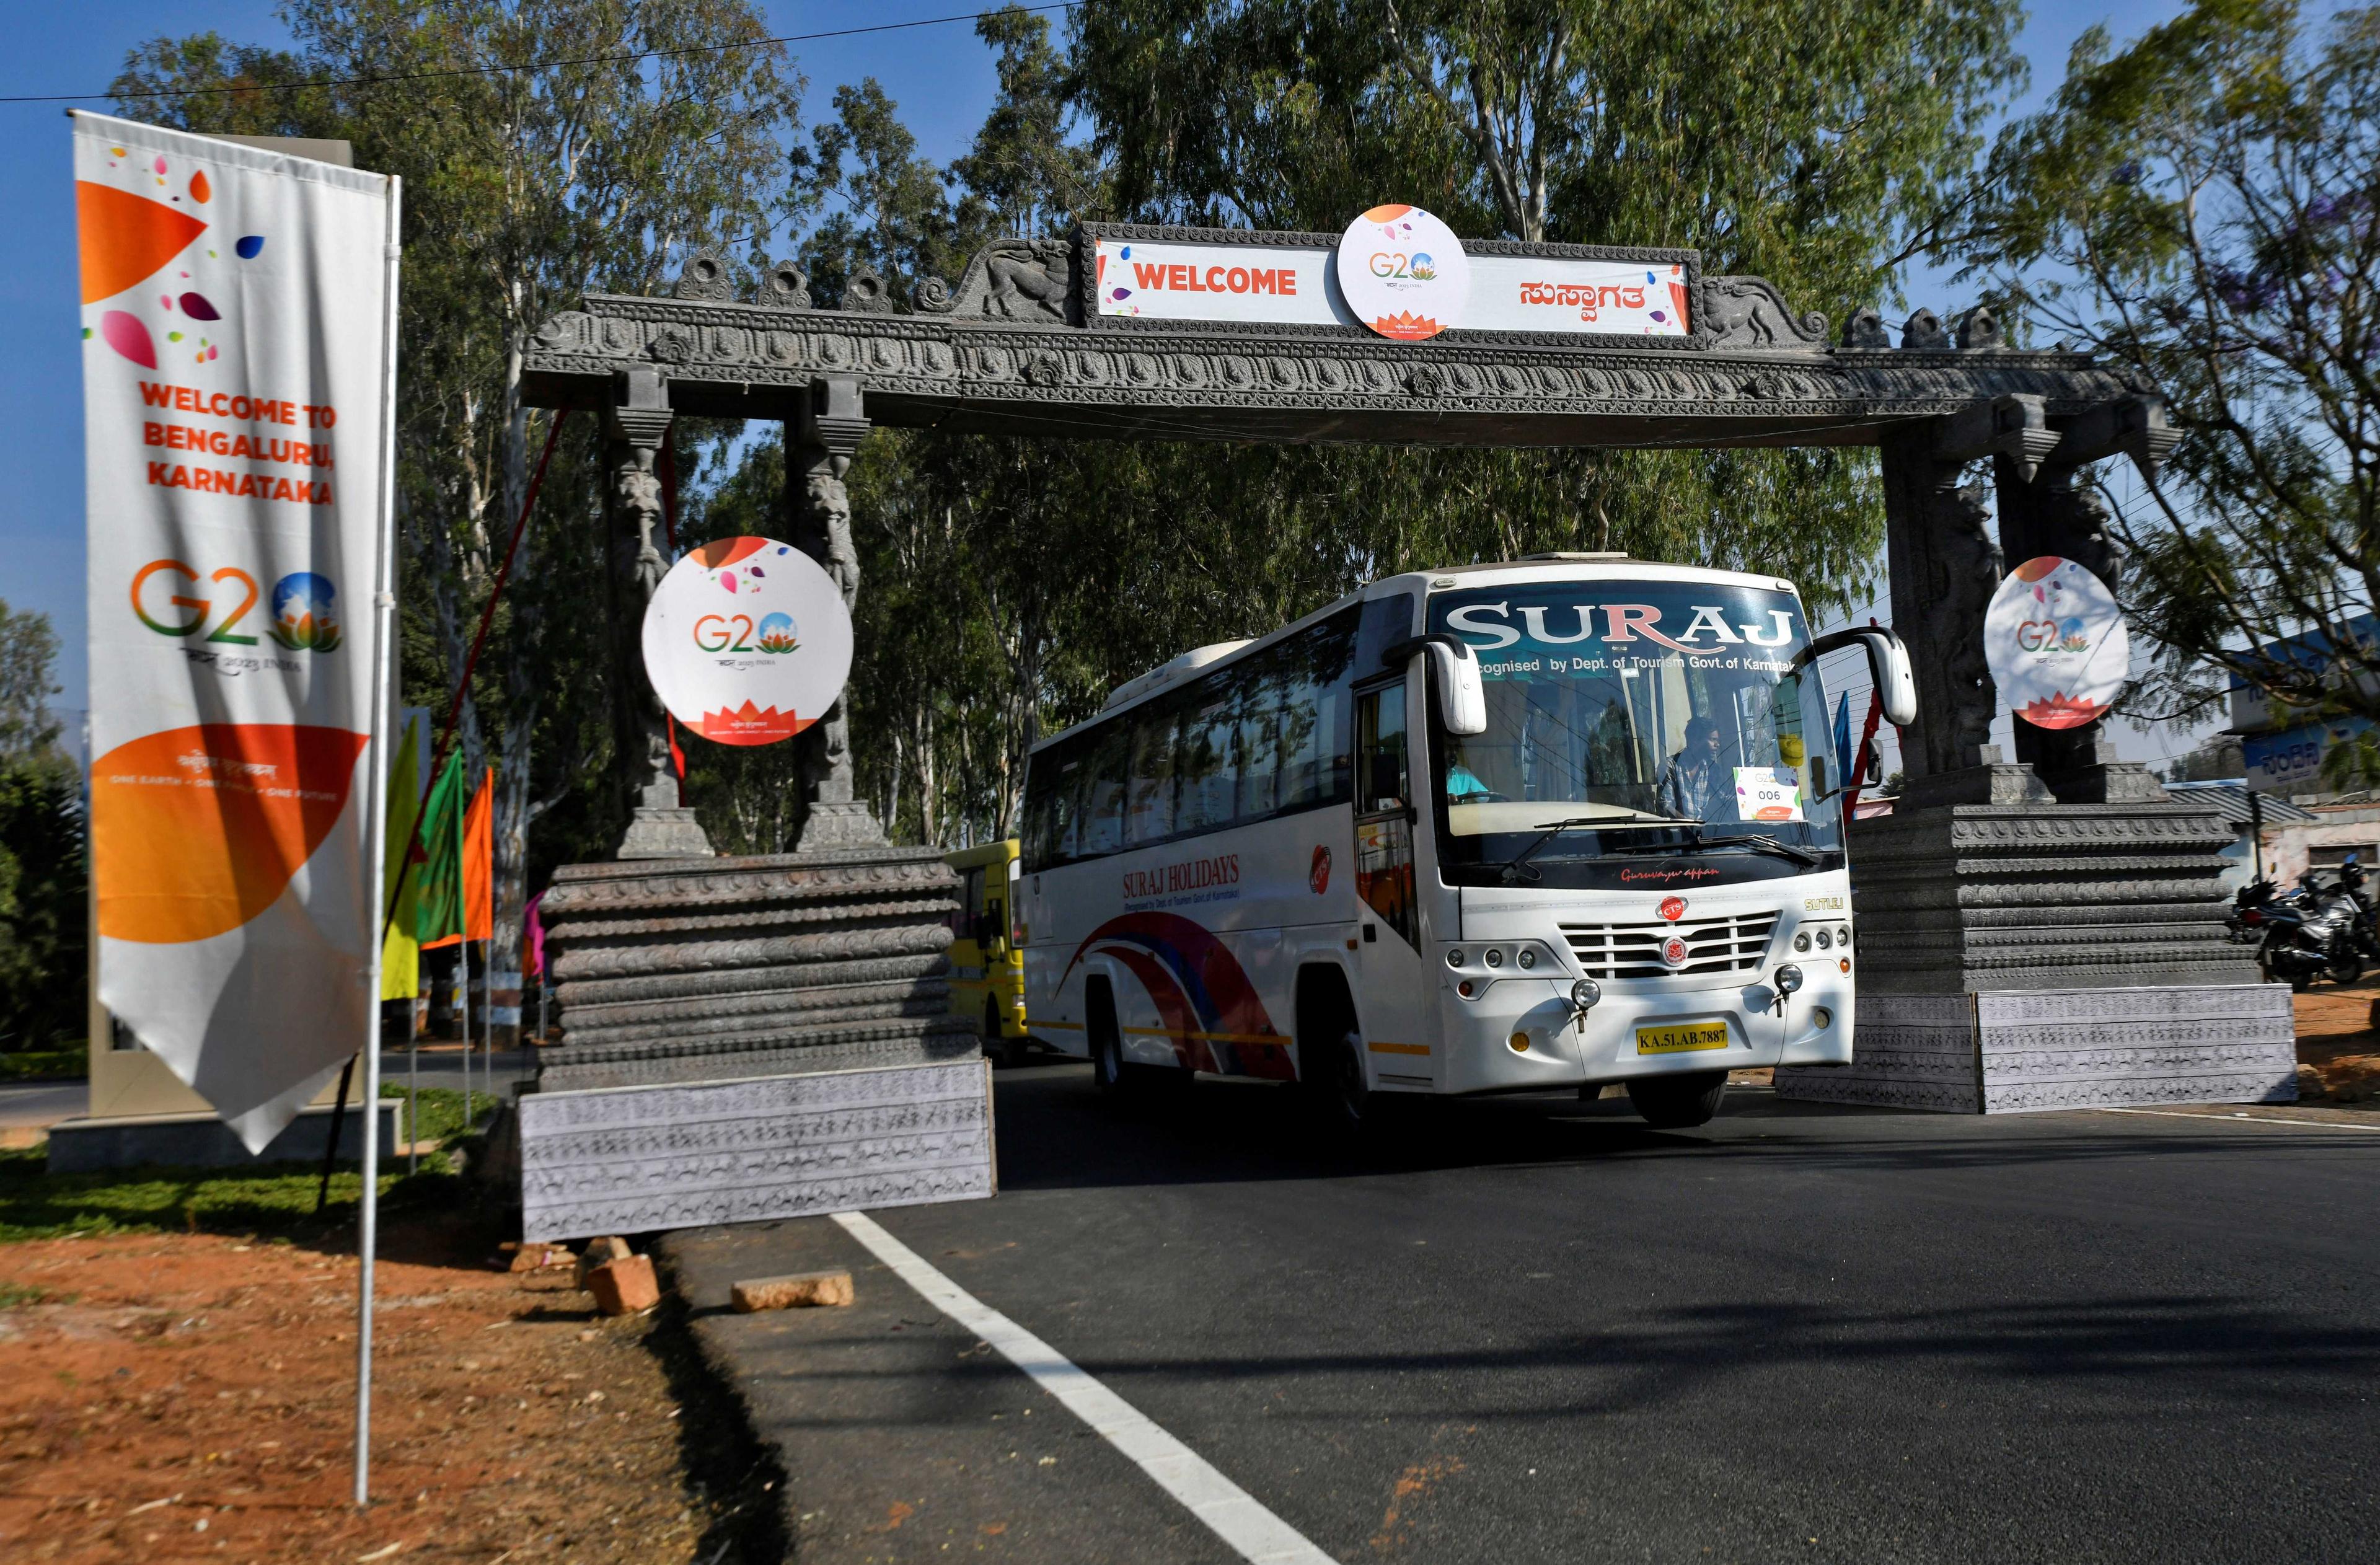 A bus carrying delegates arrives at G20 finance officials meeting venue near Bengaluru, India, Feb 22. Photo: Reuters